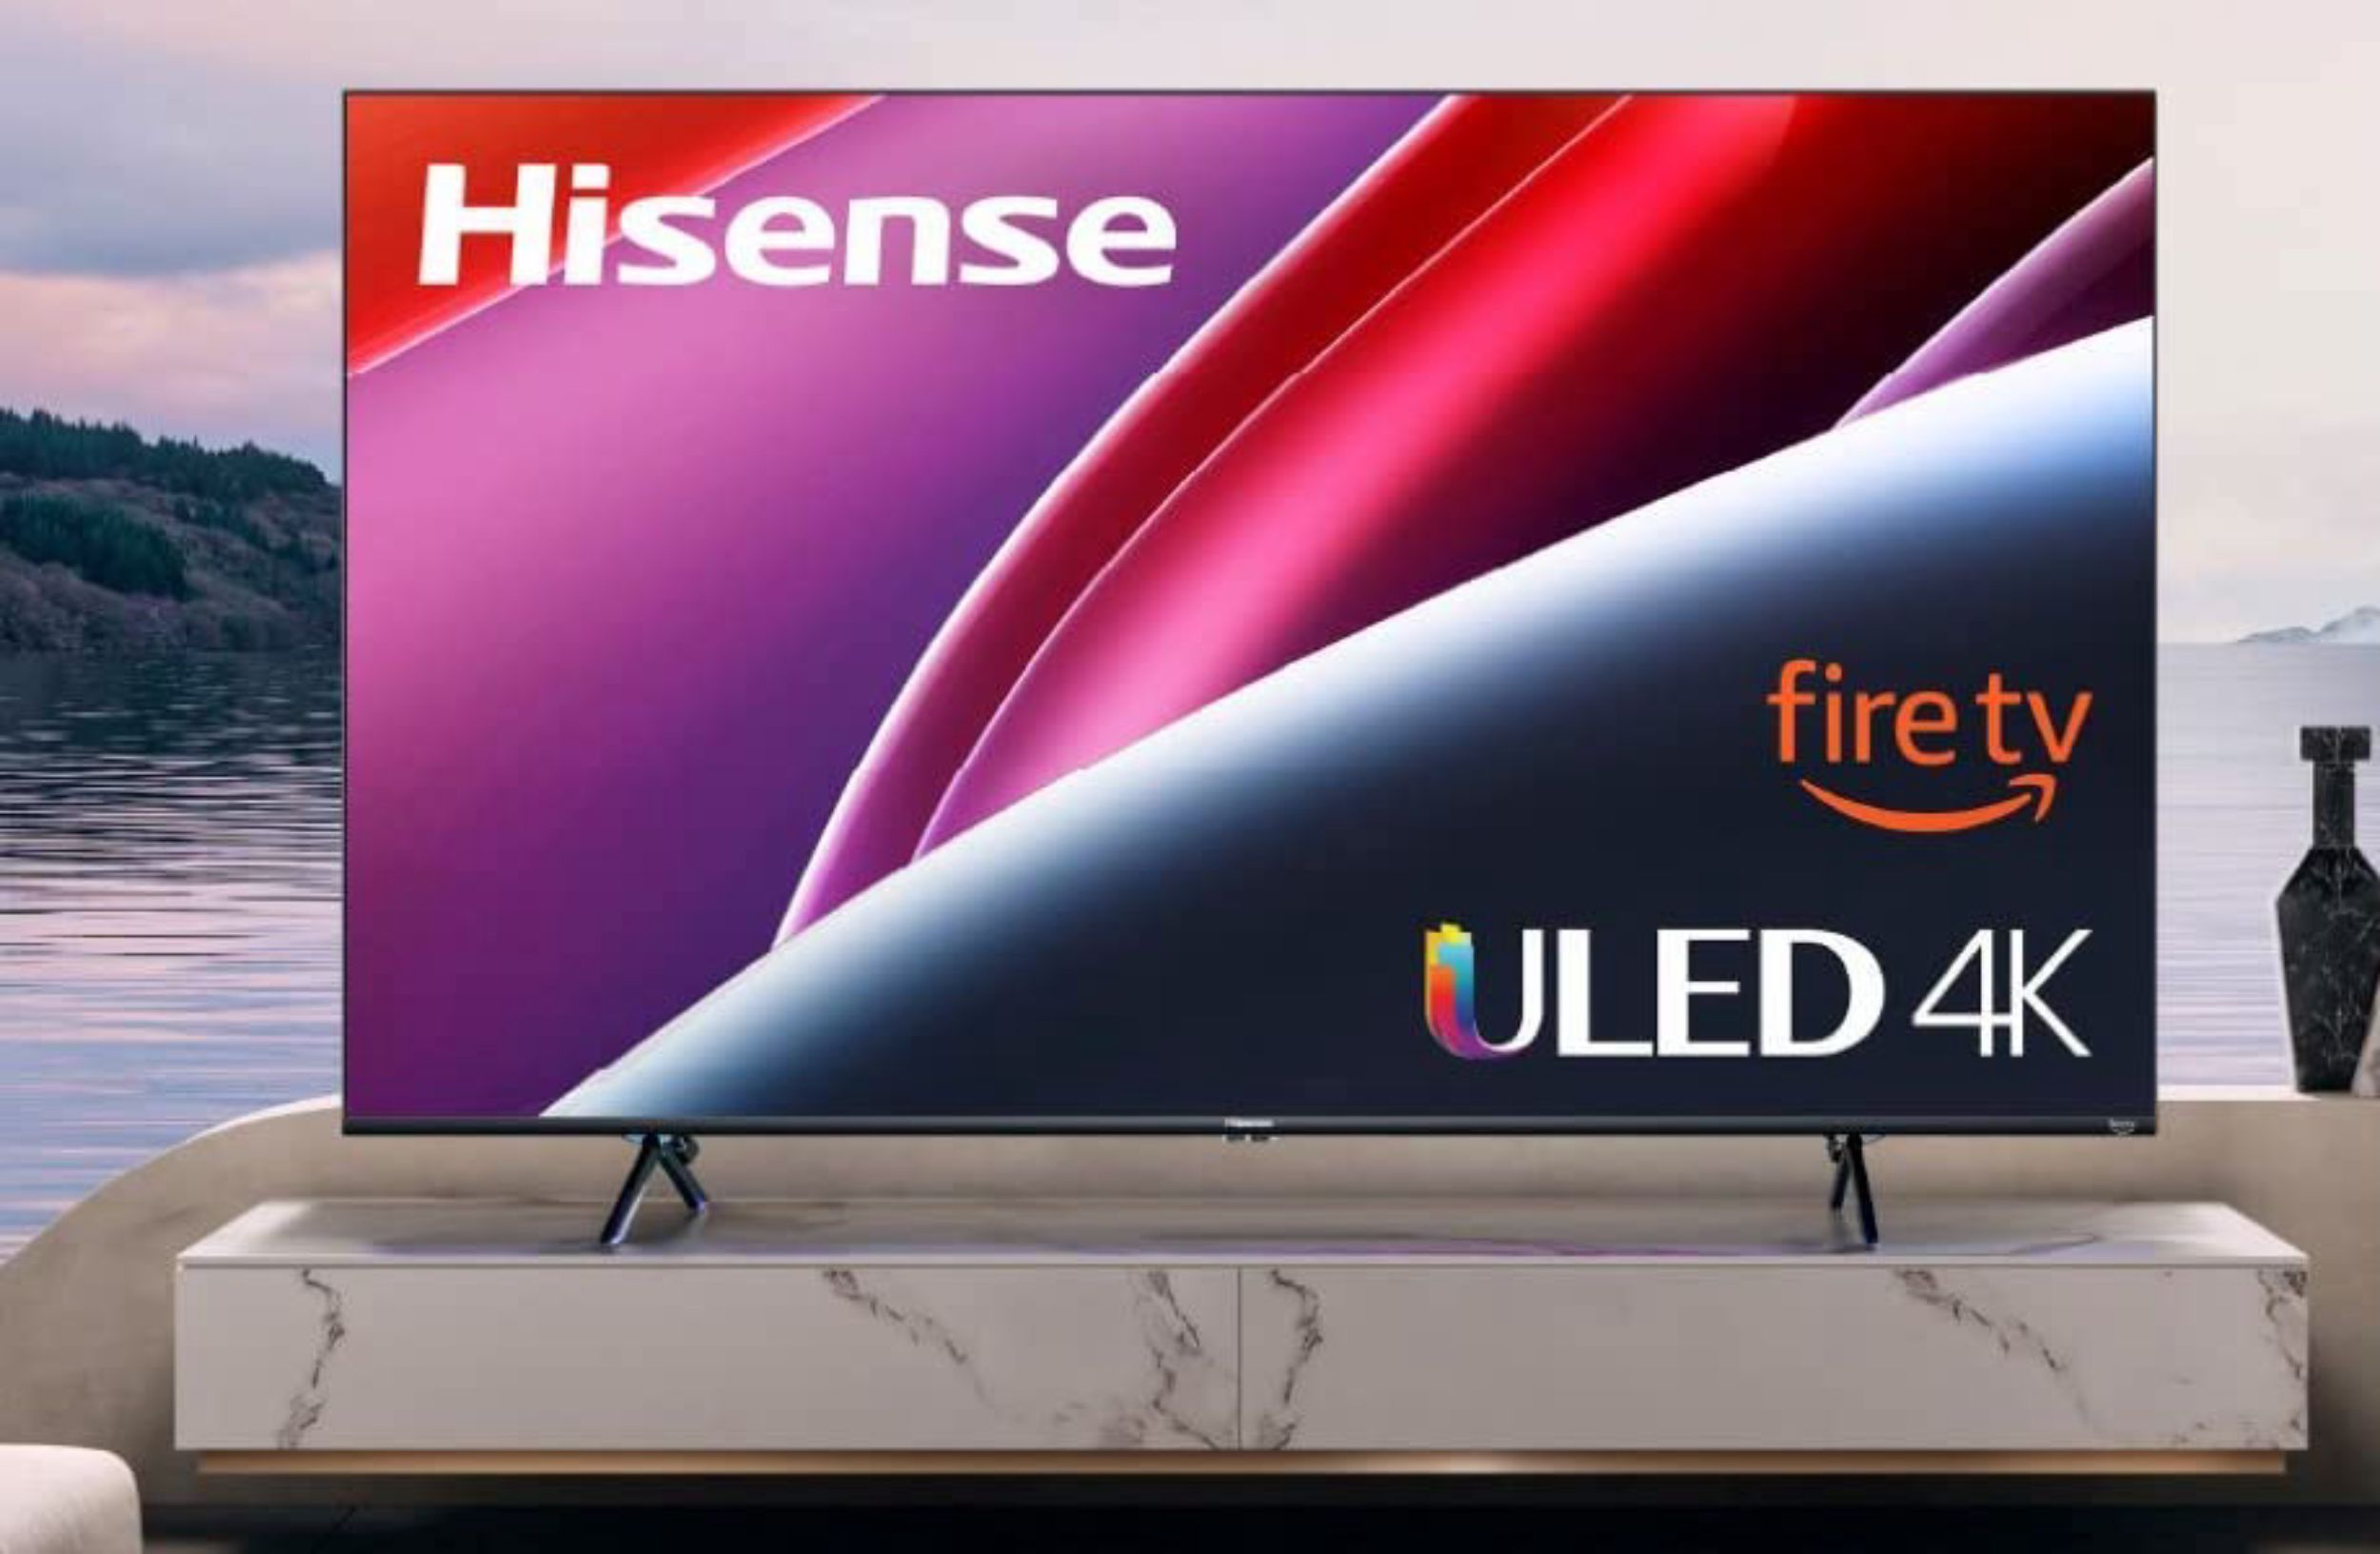 This 65-inch 4K ULED TV drops to its lowest price ever for a limited time